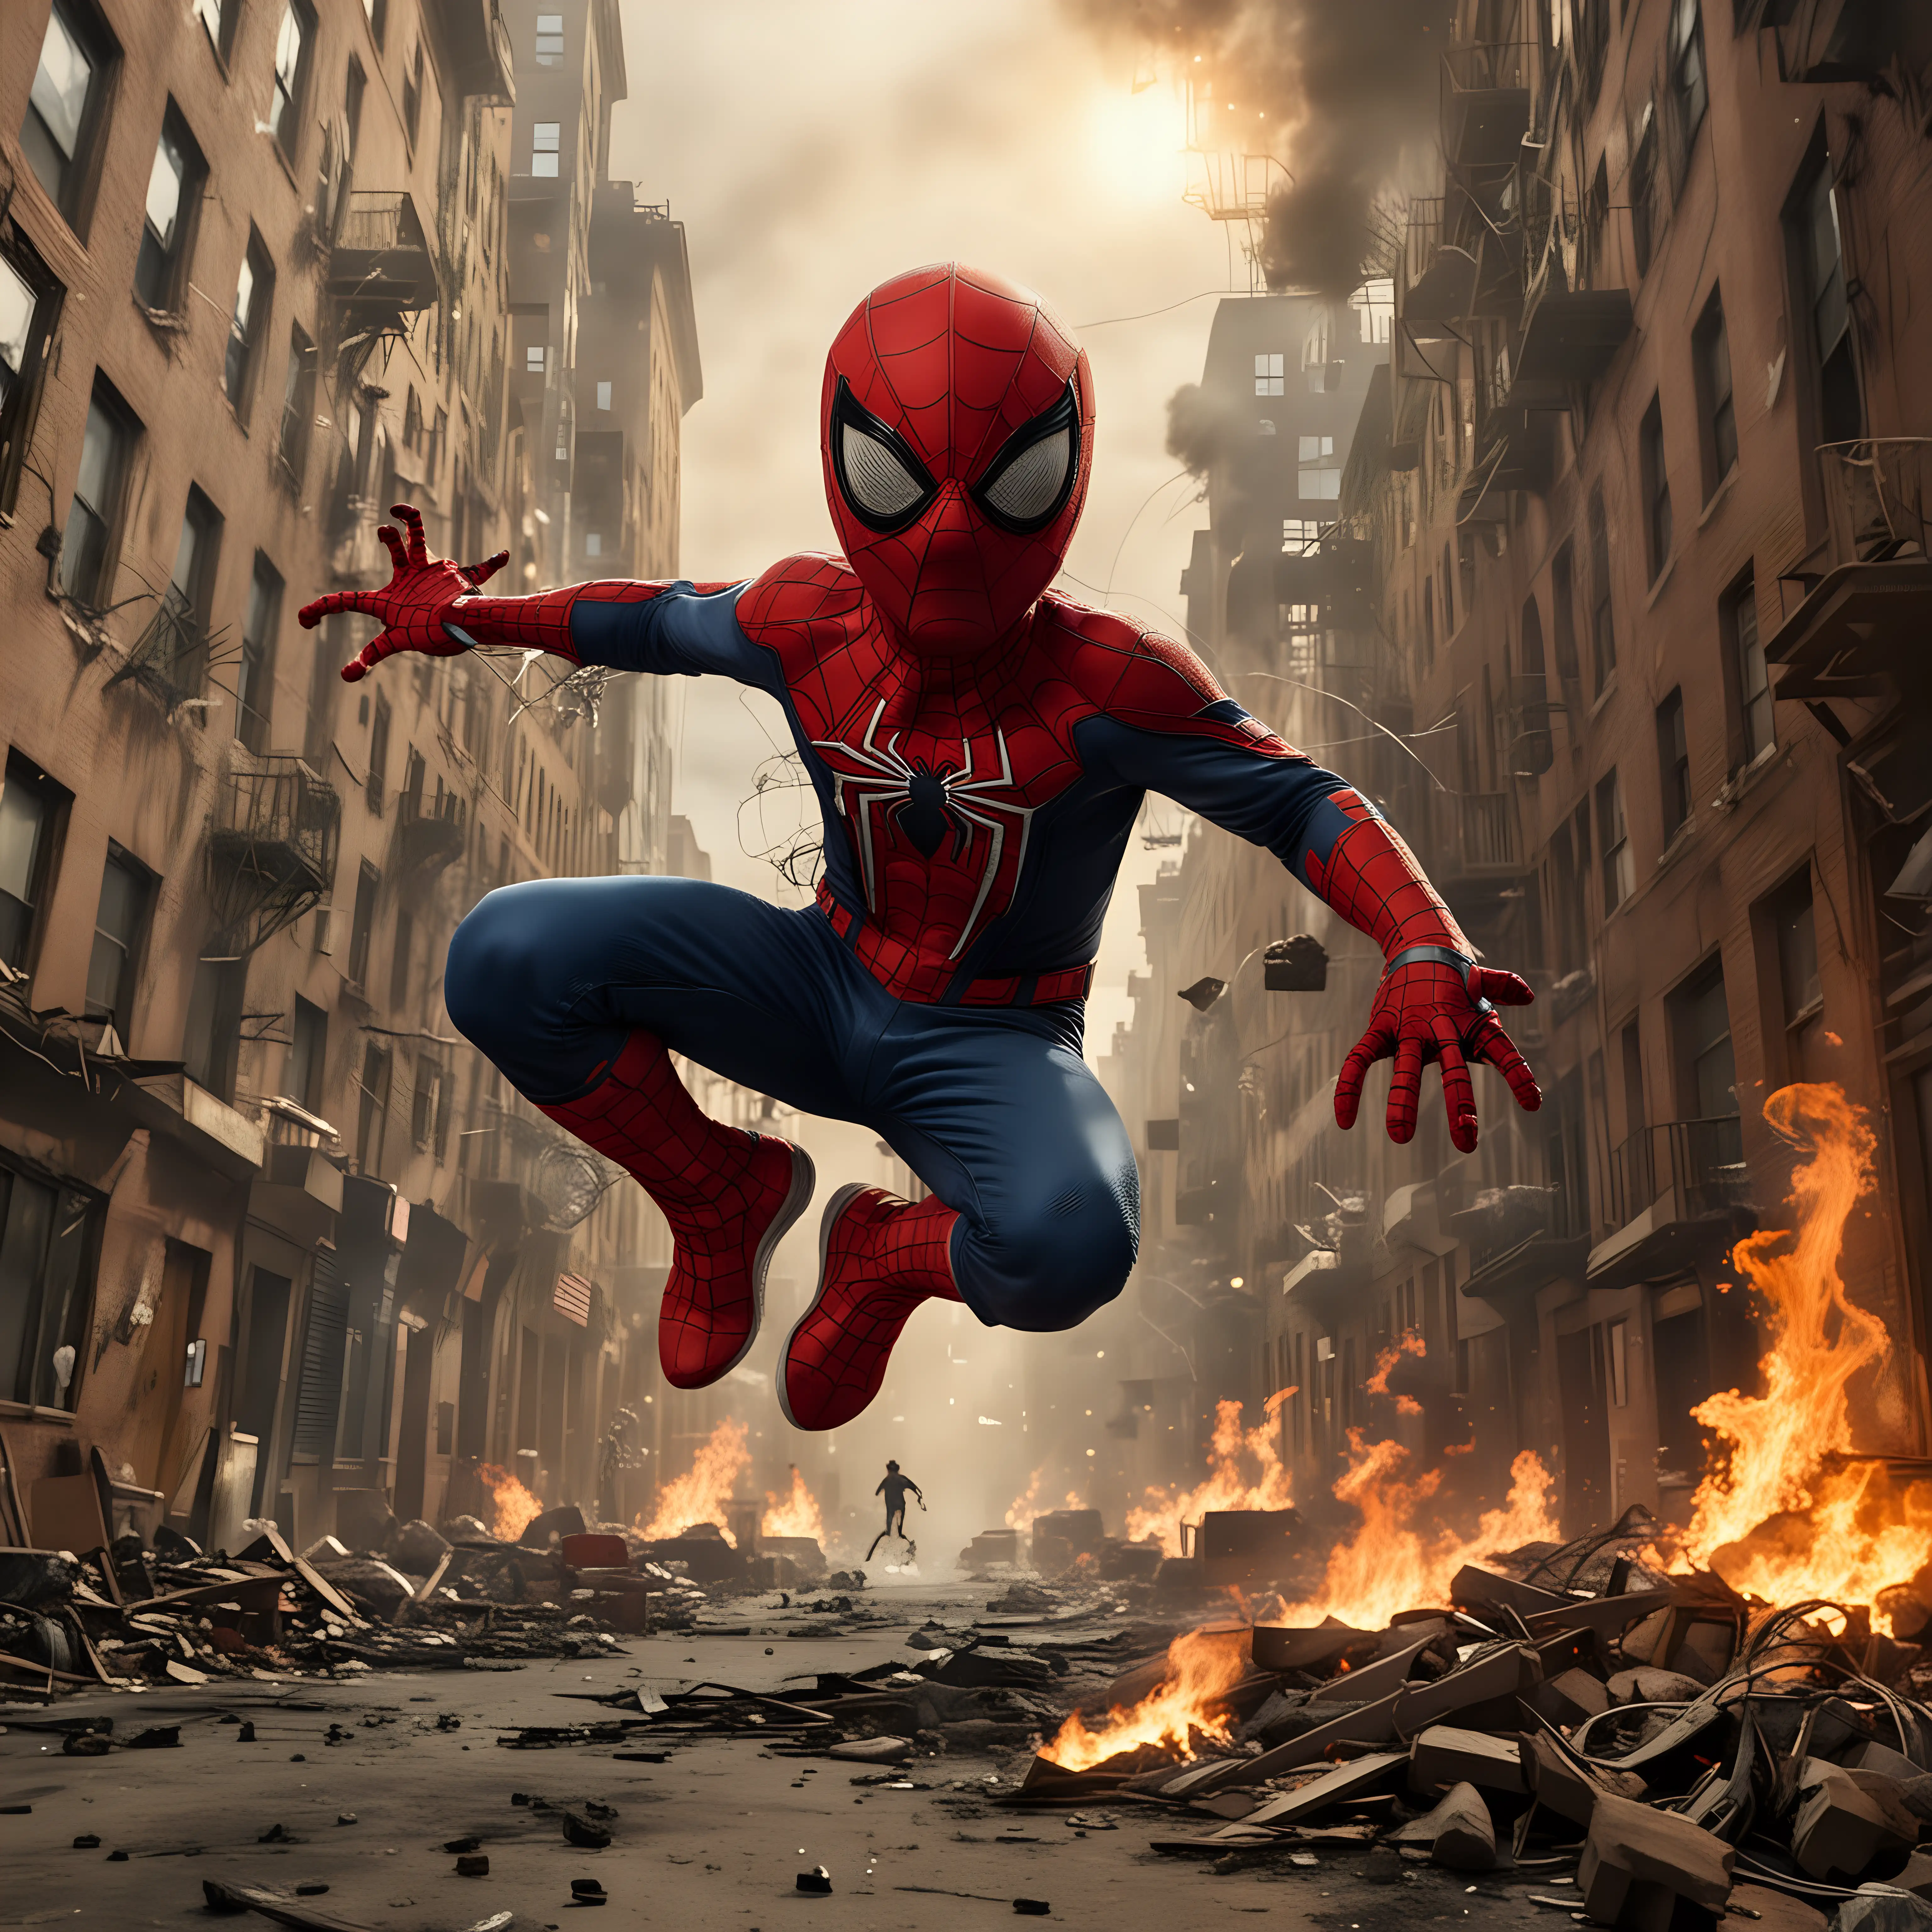 Young Boy in Spiderman Costume Leaping Amidst Urban Inferno